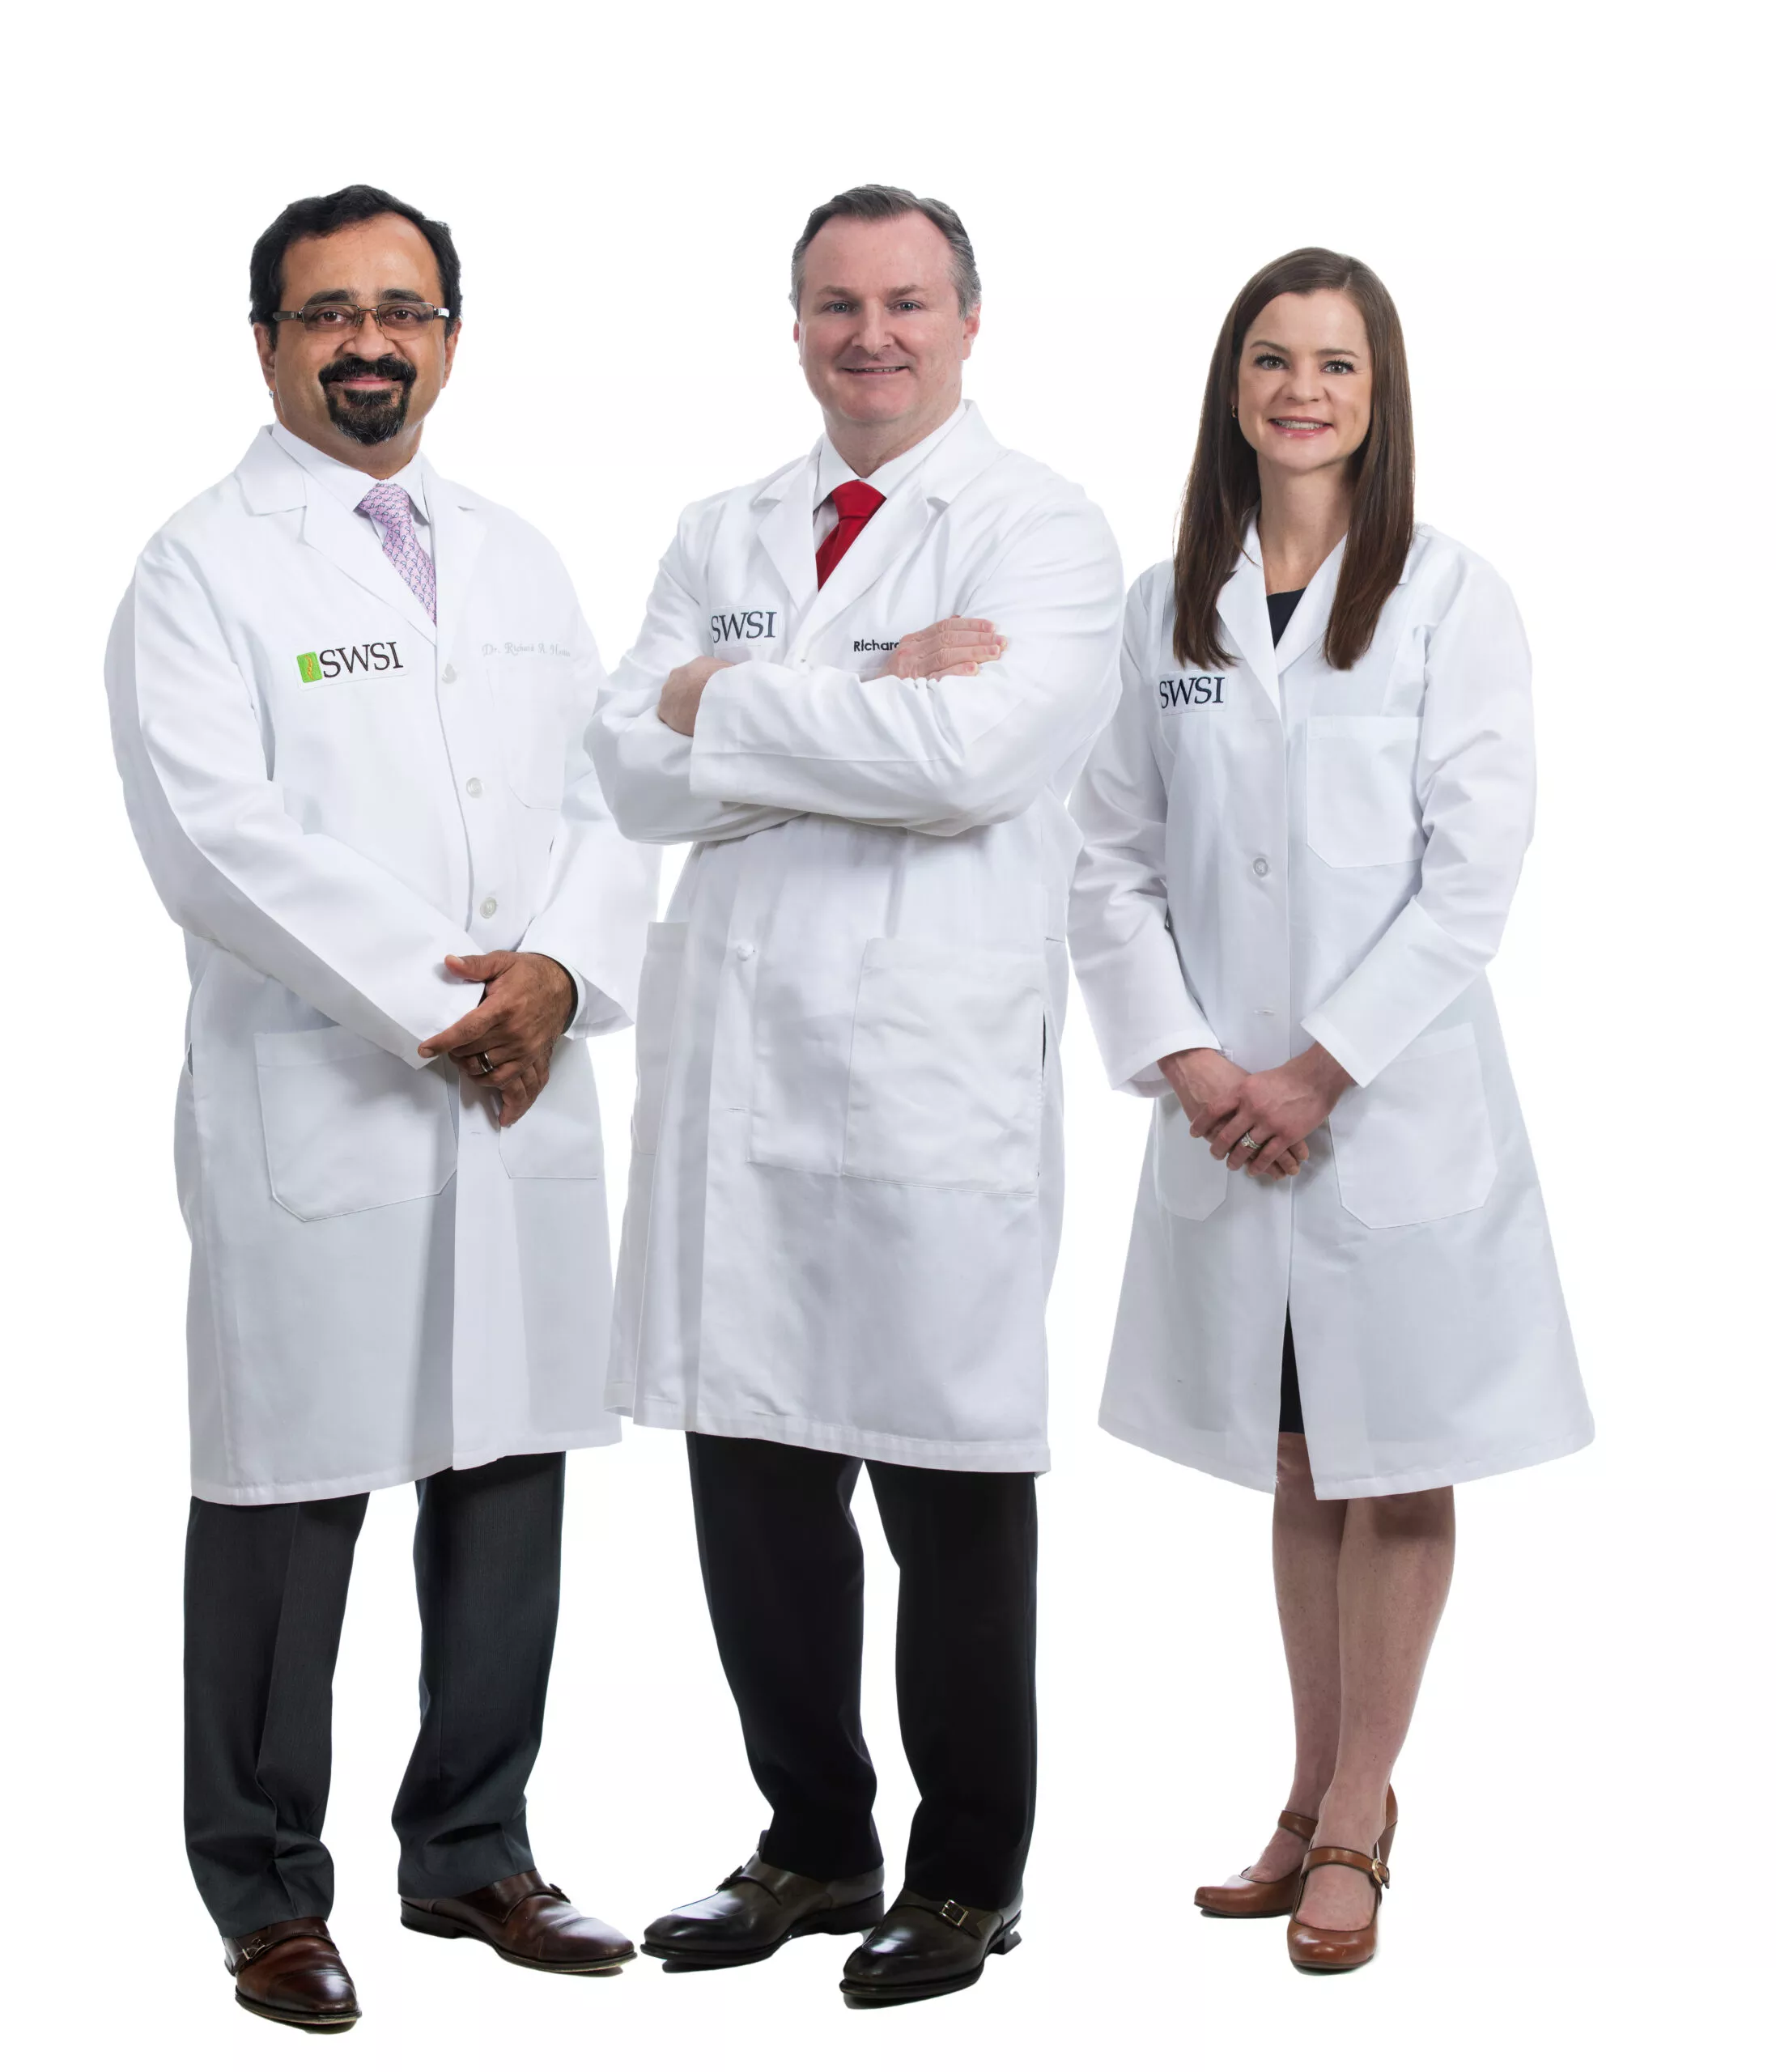 Orthopedic Physicians accepting Physician Referrals